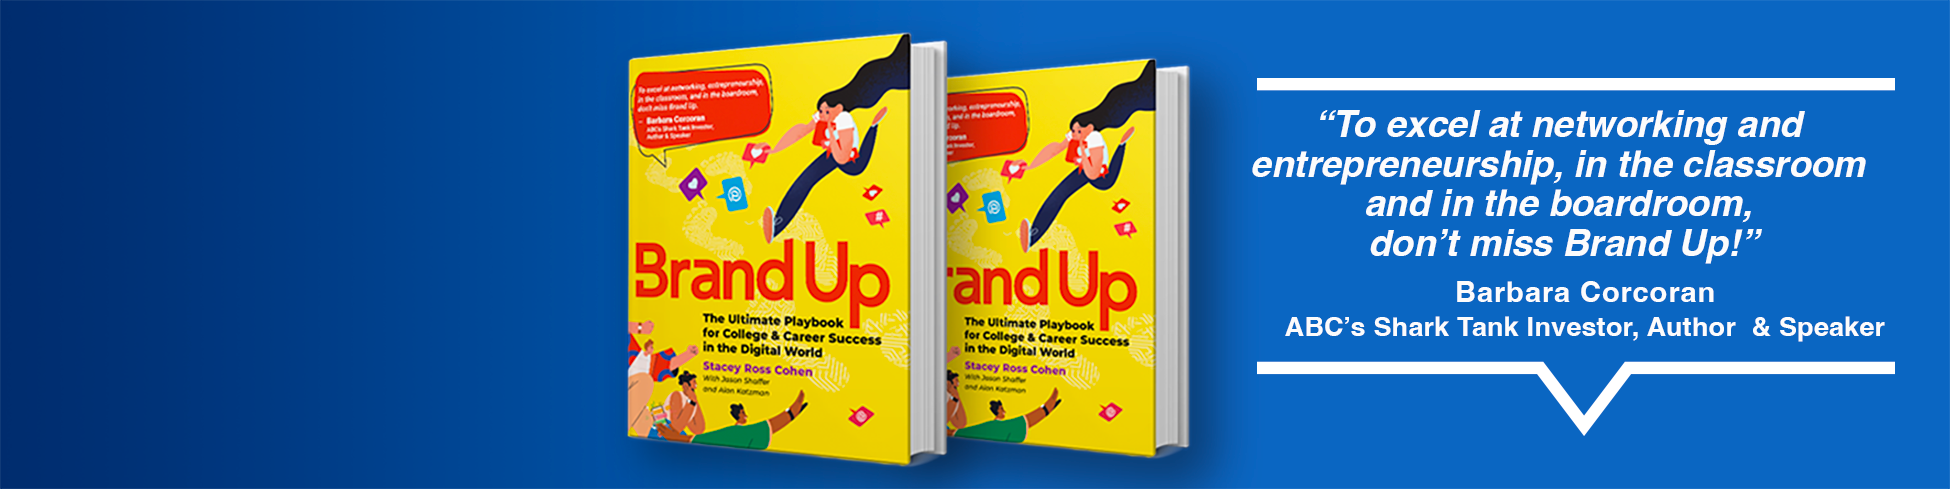 Brand Up: The Ultimate Playbook for College & Career Success in the Digital World” Makes Its Debut